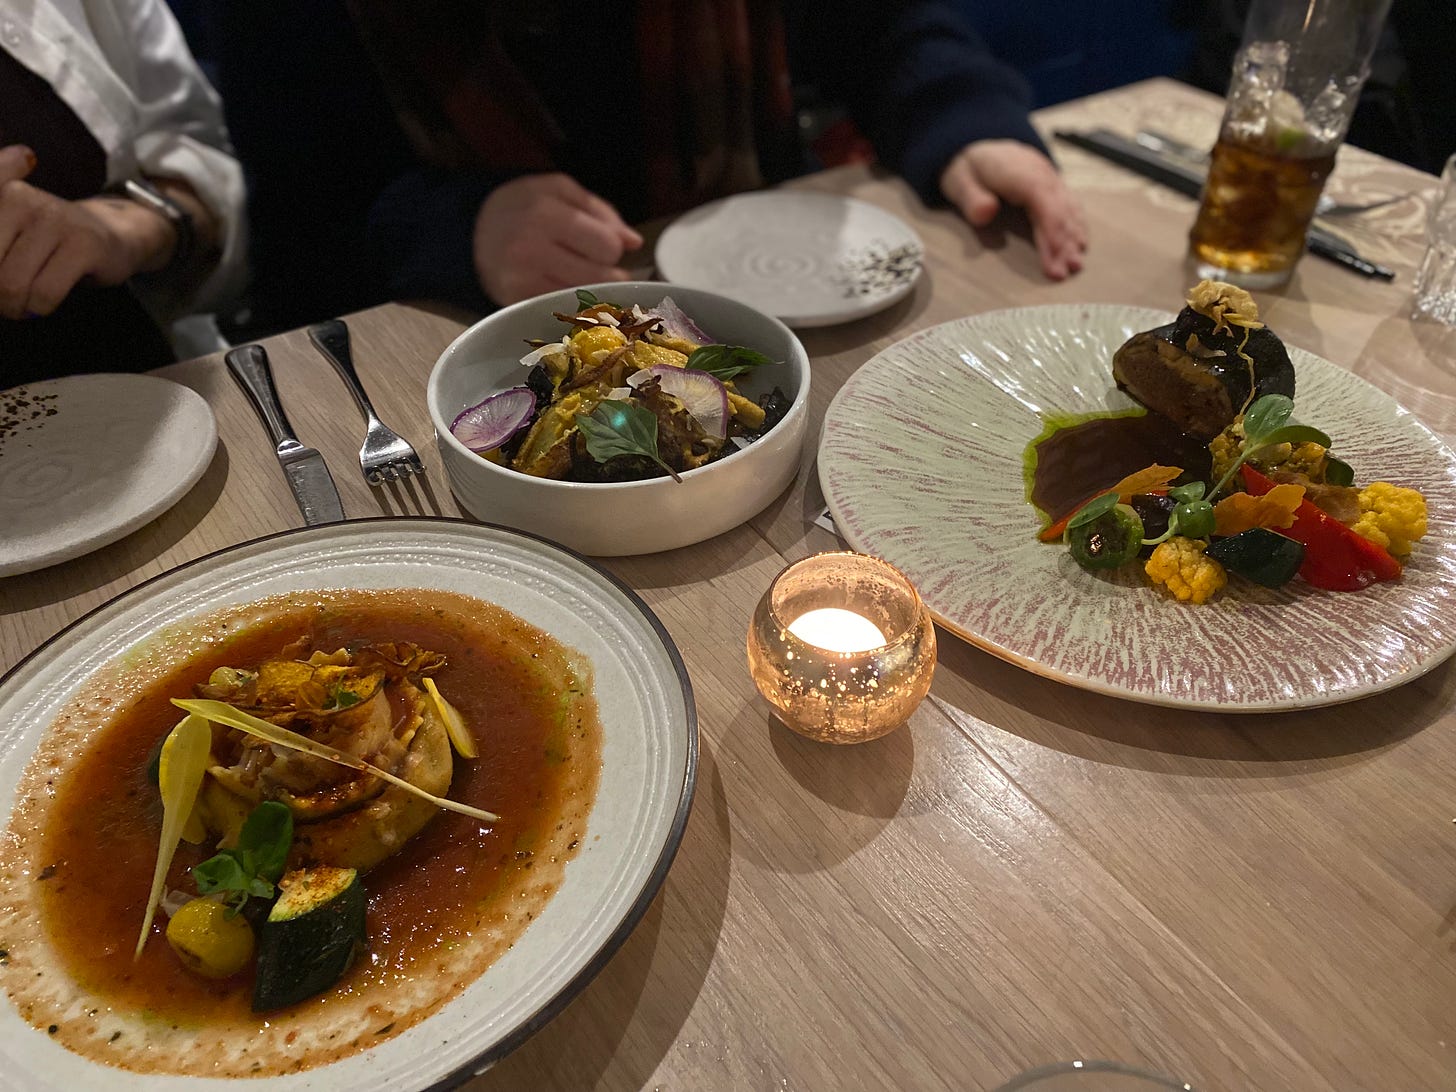 Three dishes of different sizes and shapes on a table with a votive candle in the centre. One features a large stuffed pasta in a thin sauce, one holds a vegetable curry over black rice, and the last has a mushroom roulade with roasted vegetables, a jus in the bottom of the plate. Two people's hands are visible in the background, in front of side plates and cutlery.